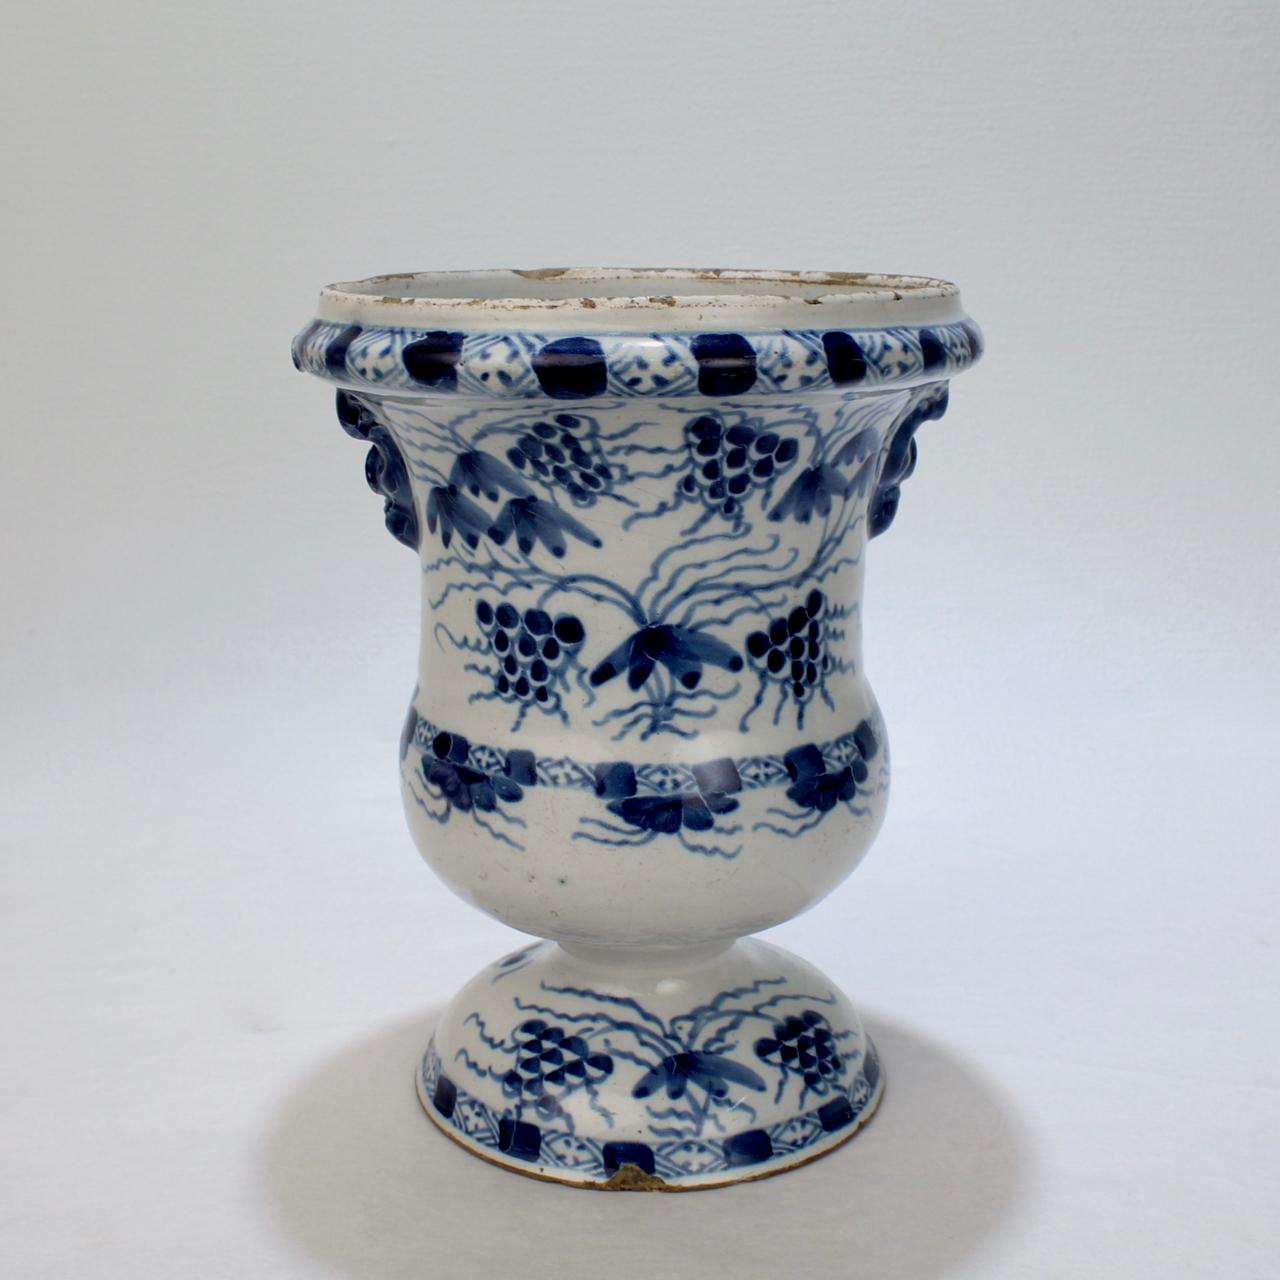 A fine 18th century English delftware pottery urn or footed vase.

With rich blue and white decoration throughout.

Likely Bristol.

Measures: Height ca. 7 1/4 in.

Provenance: Gary Atkins (with his old pricing stickers & inventory